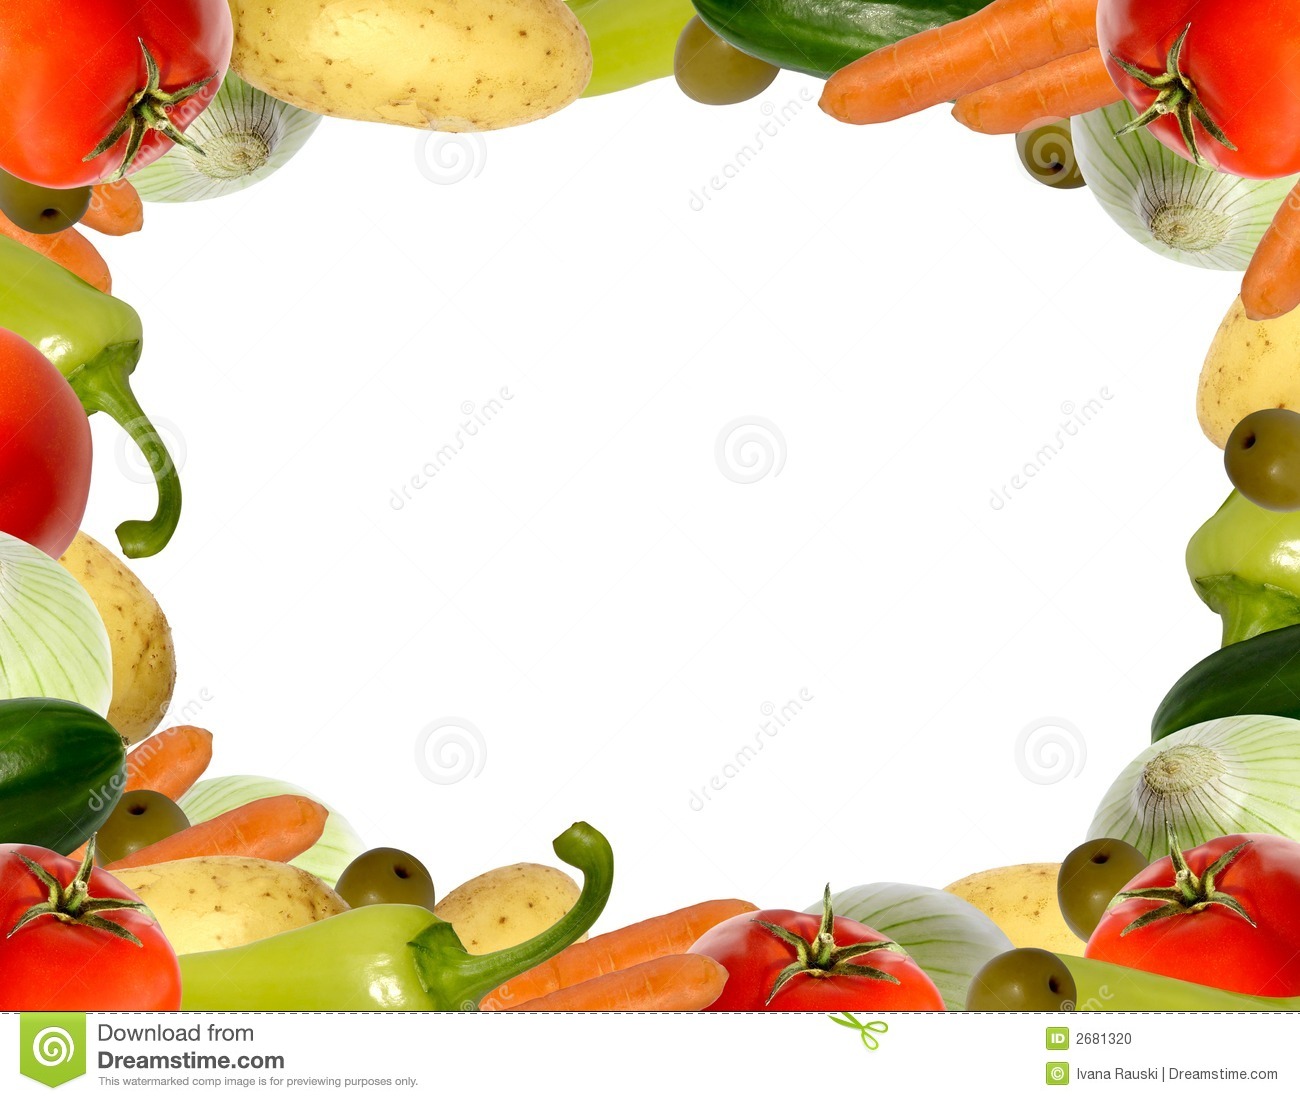 Displaying 18  Images For   Fruits And Vegetables Border Clipart   